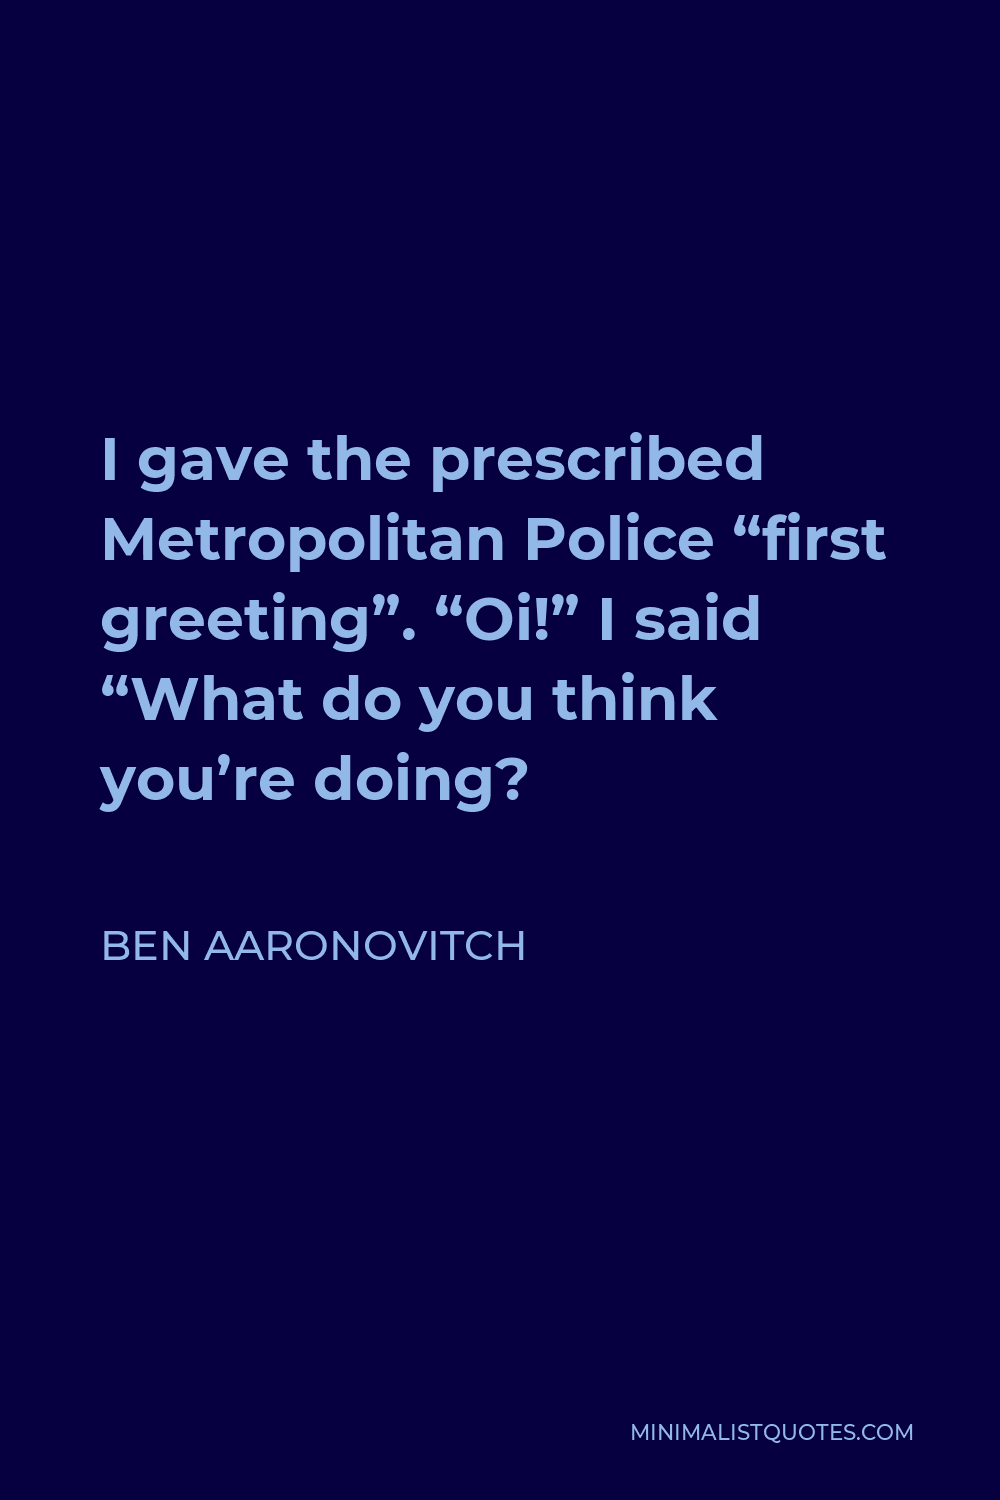 Ben Aaronovitch Quote - I gave the prescribed Metropolitan Police “first greeting”. “Oi!” I said “What do you think you’re doing?